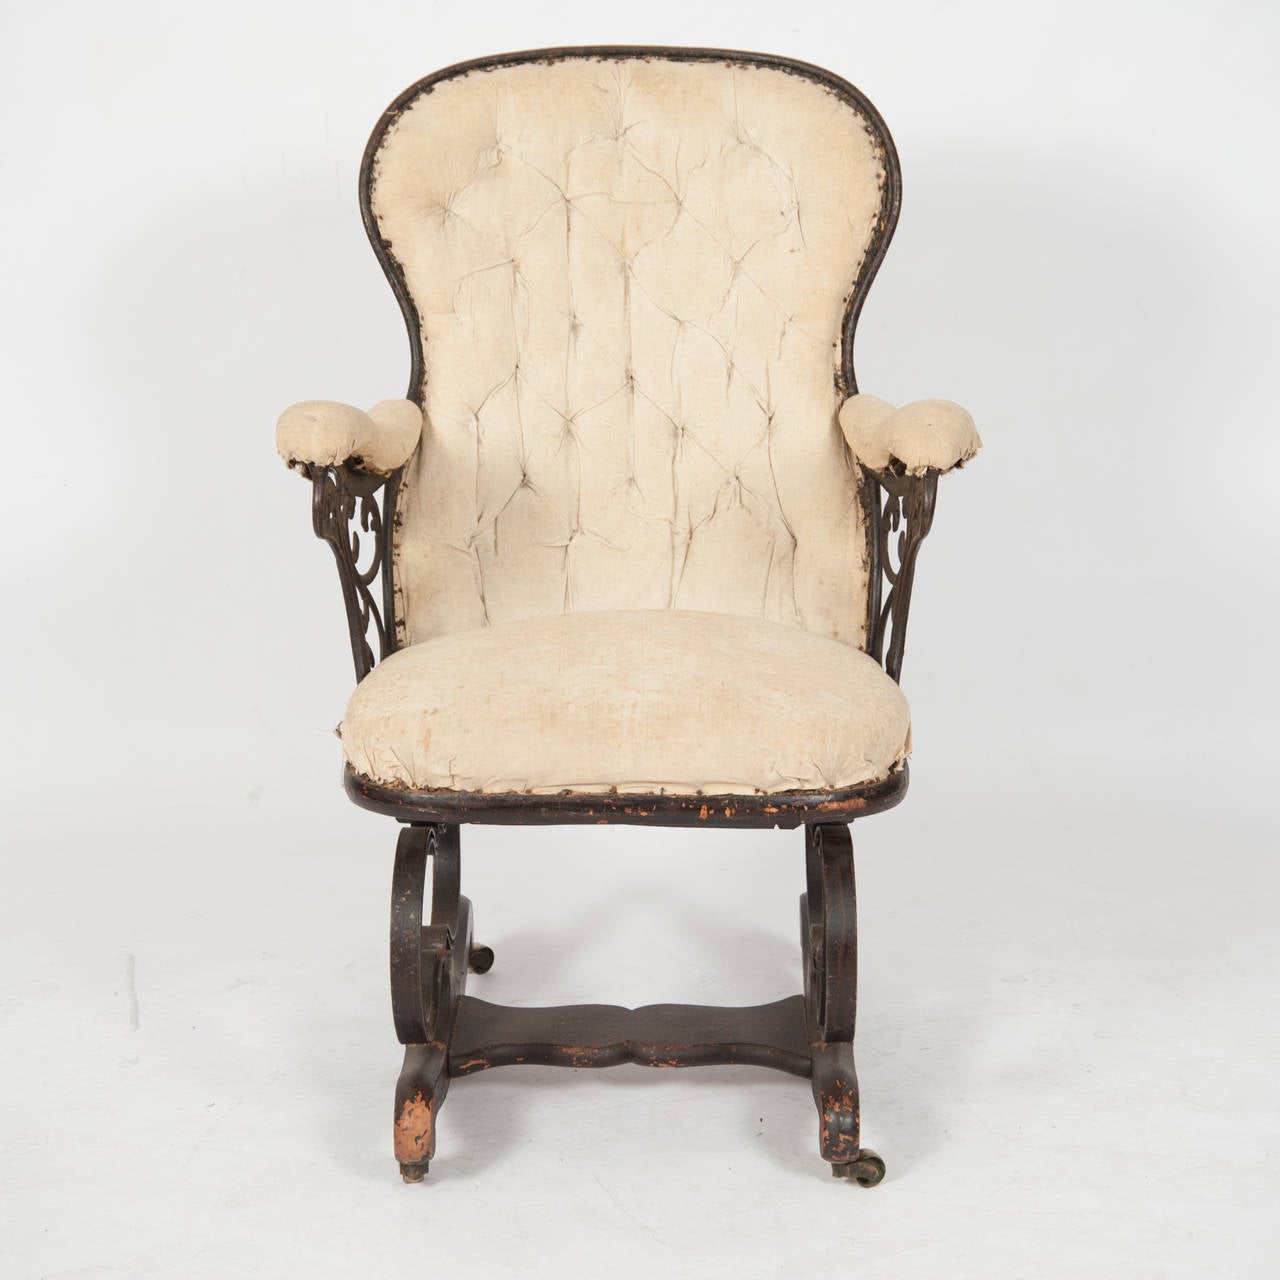 American Rocking Chair The Metal Frame With A Buttoned Spoon Back Padded Arms Above Cast Scroll Work The Sprung Chasse on Timber Feet and Casters

Height 940 
Length 620 
Depth 620